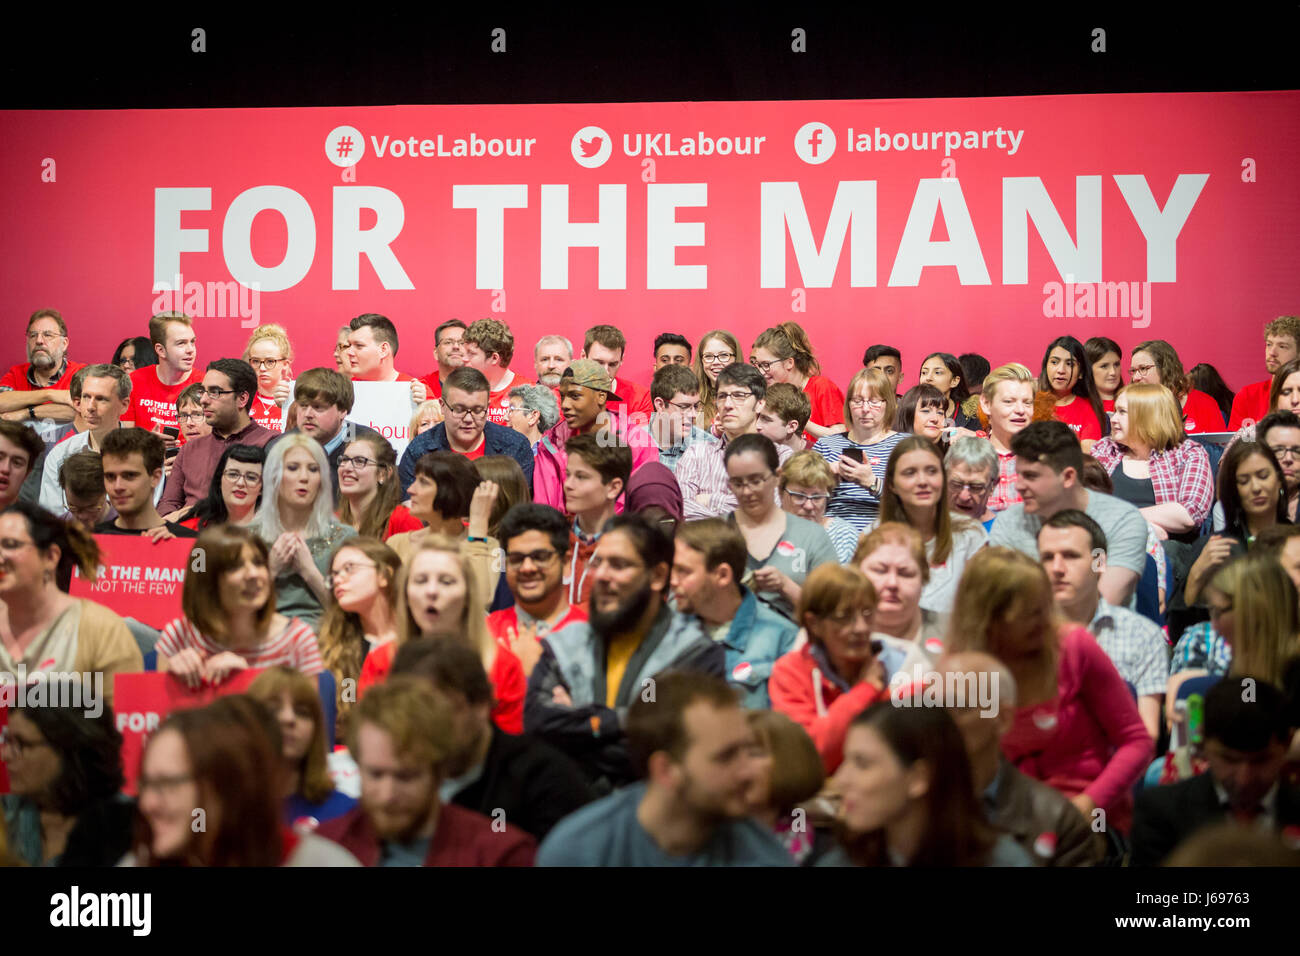 For the Many slogan on a banner at a Labour Party rally, UK 2017 elections Stock Photo